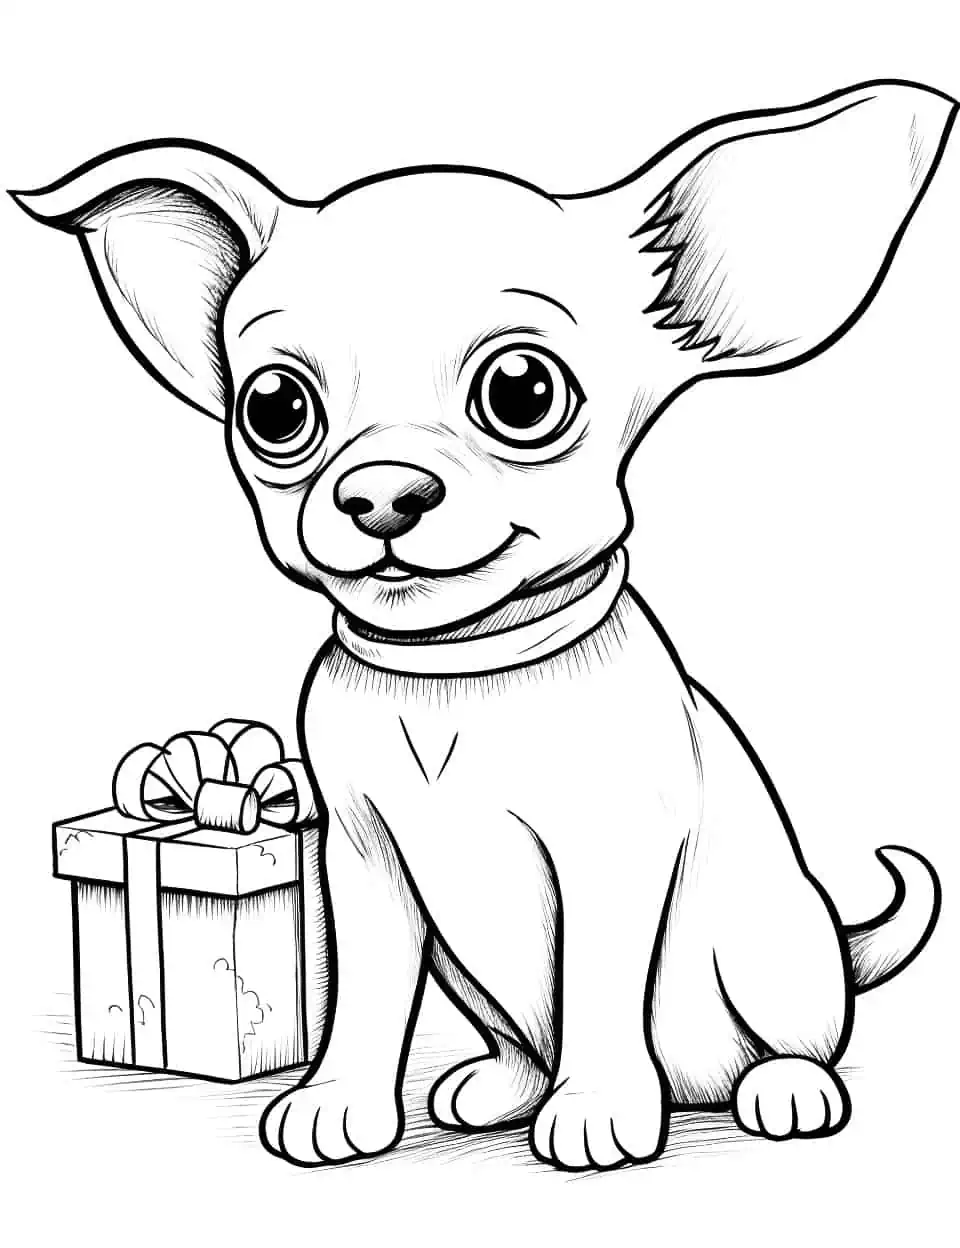 Christmas with a Chihuahua Coloring Page - A chihuahua puppy opening a Christmas present.